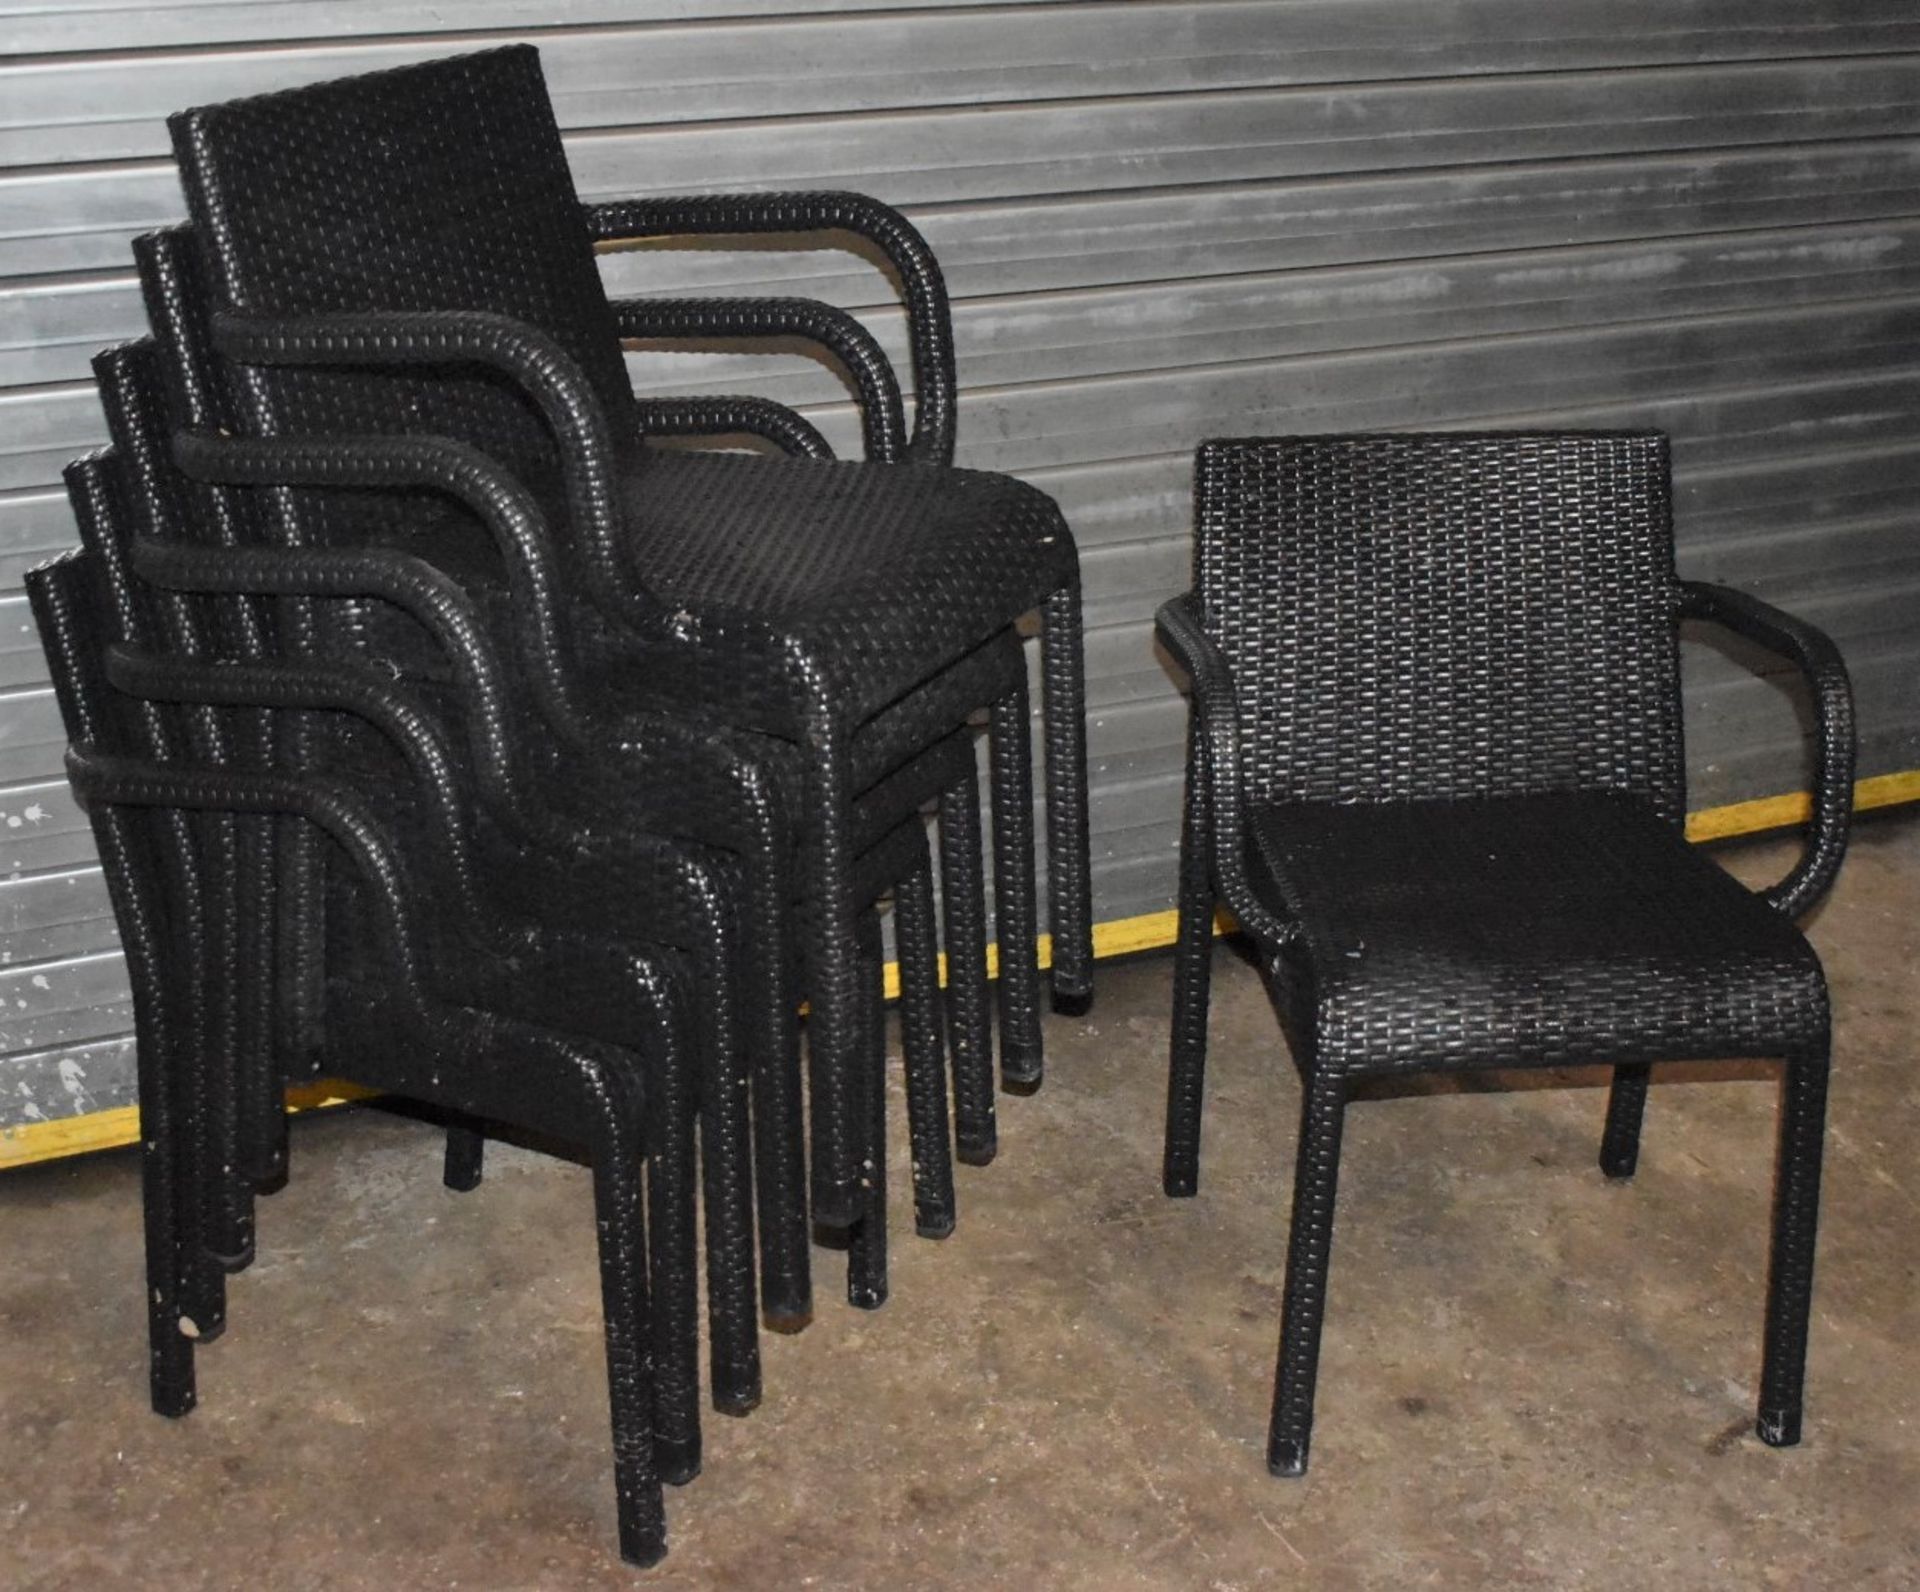 6 x Outdoor Stackable Rattan Chairs With Arm Rests - CL999 - Ref WH5 - Provided in Very Good - Image 9 of 9